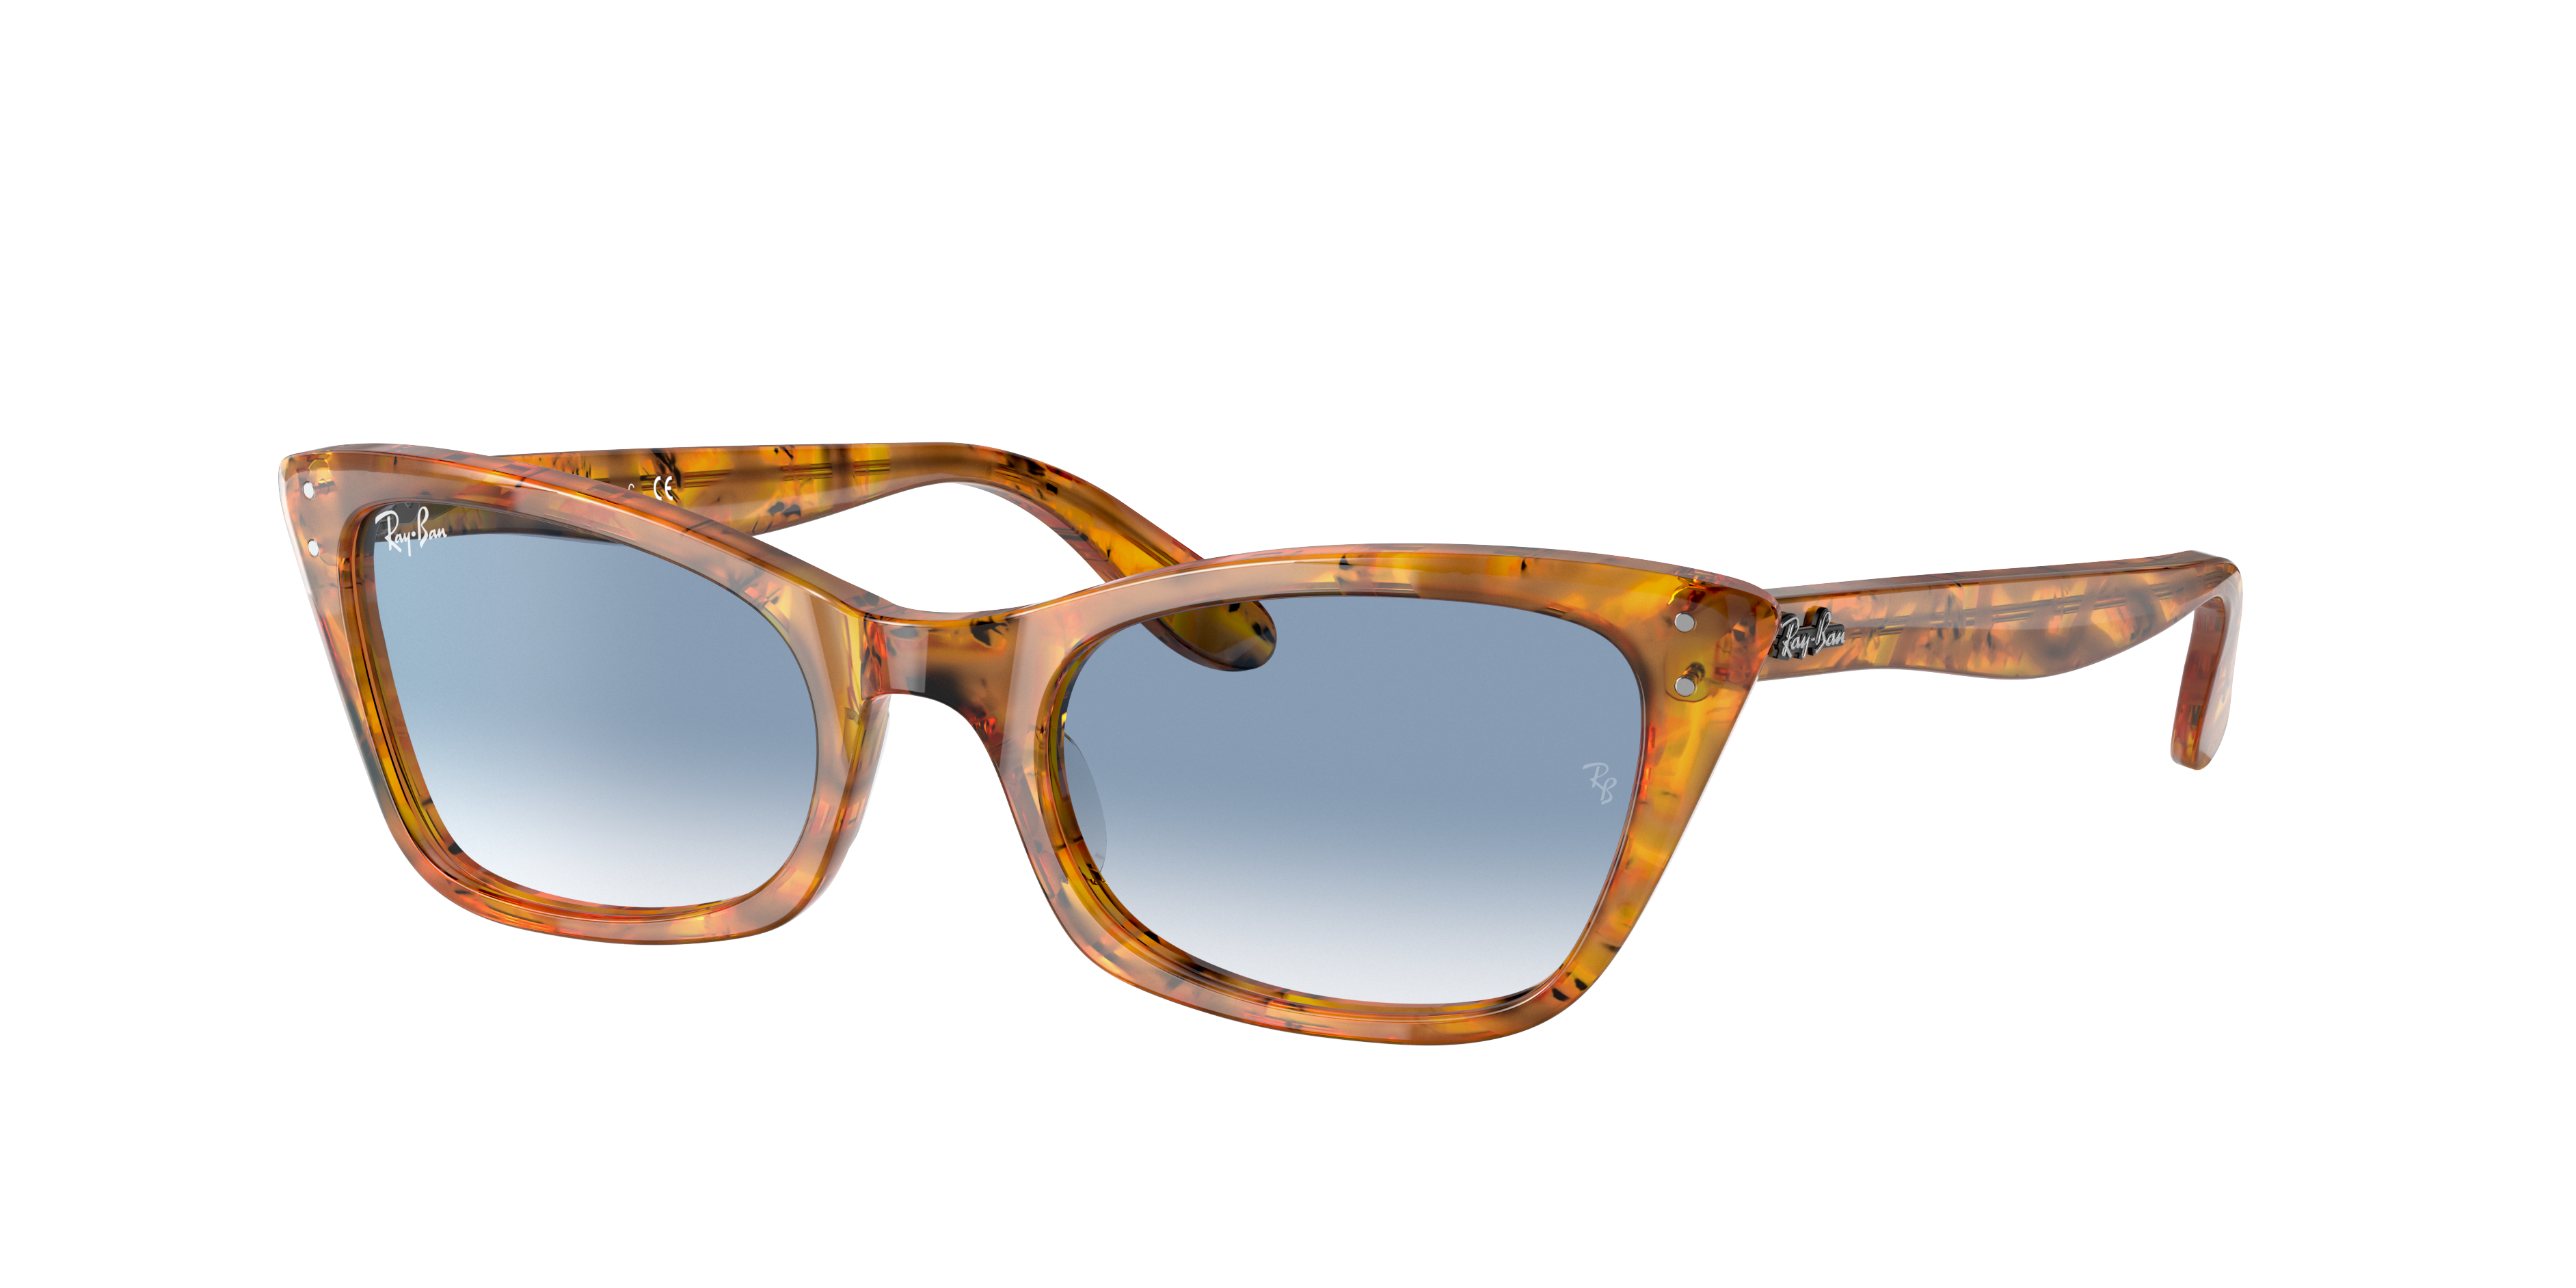 Lady Burbank Sunglasses in Tortoise and Blue | Ray-Ban®